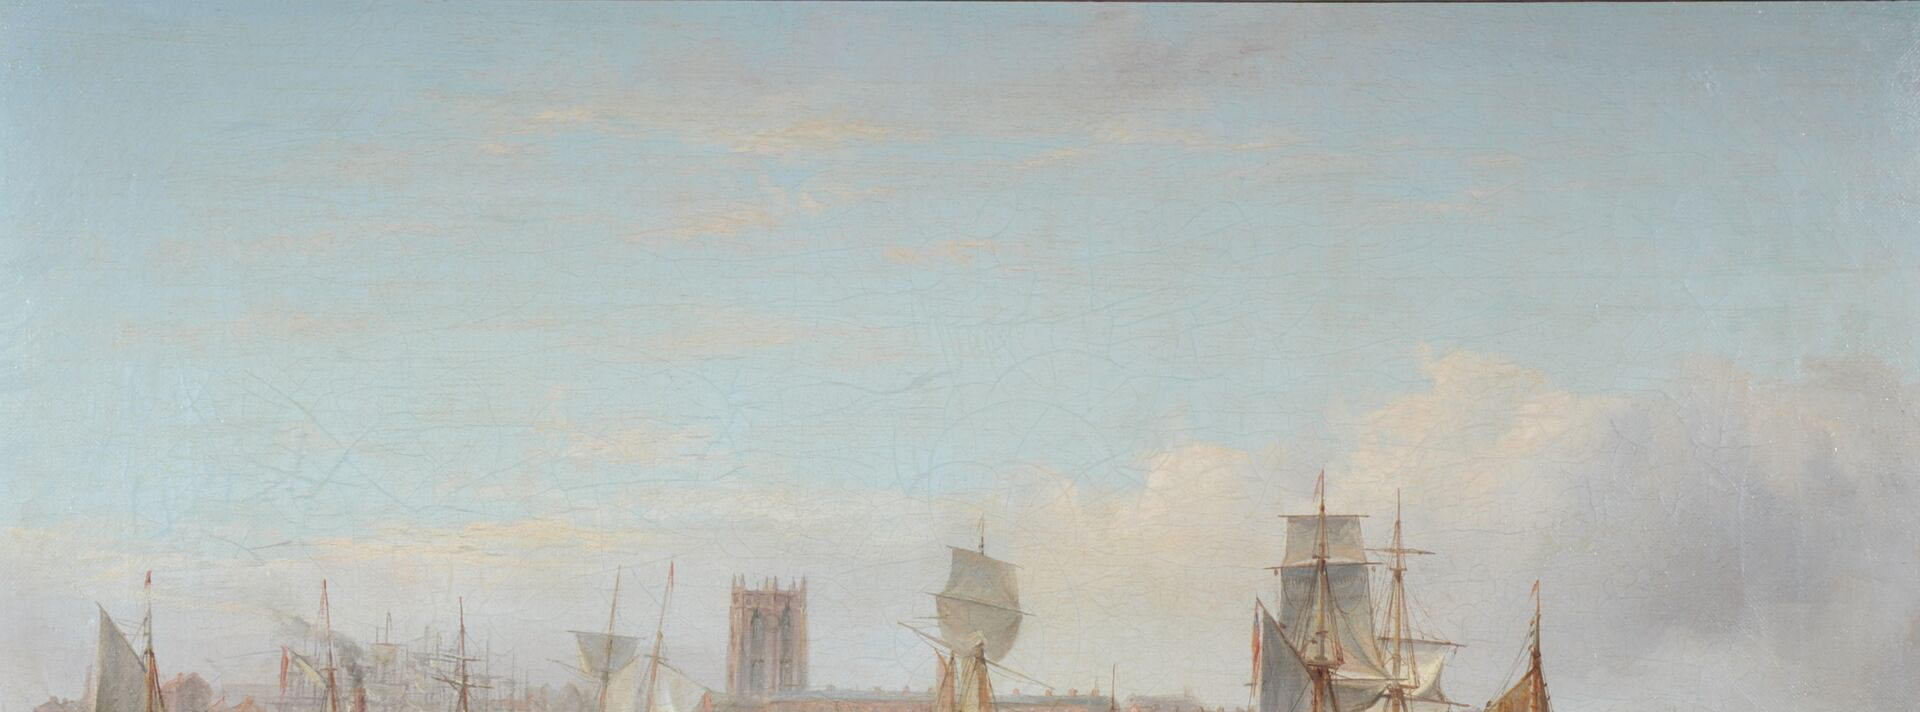 Henry Redmore River Humber Oil Painting from University Art Collection